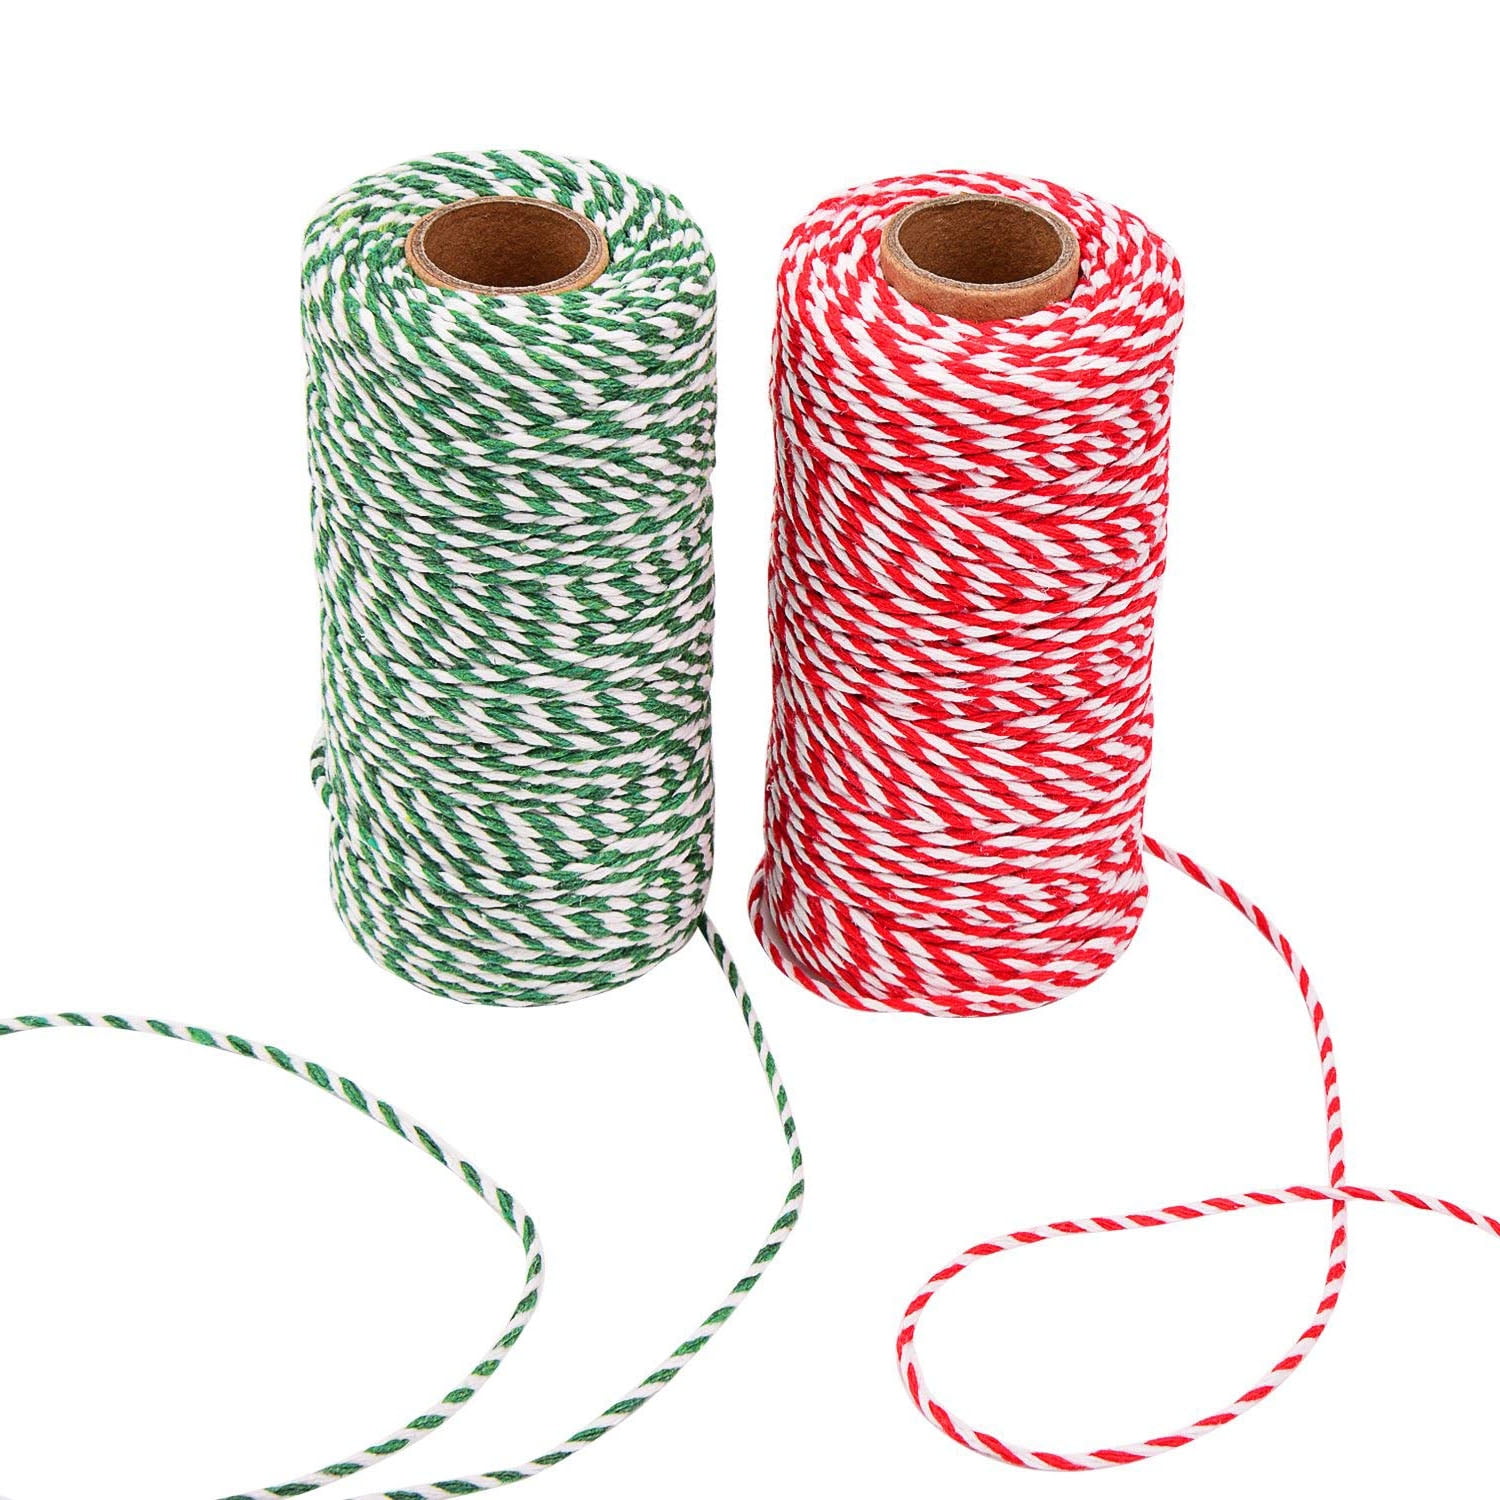 Utop Rope Cotton Twine String for Crafts Cotton Cord use for Cooking Twine and Butchers Twine Bakers Twine Rope Craft String 